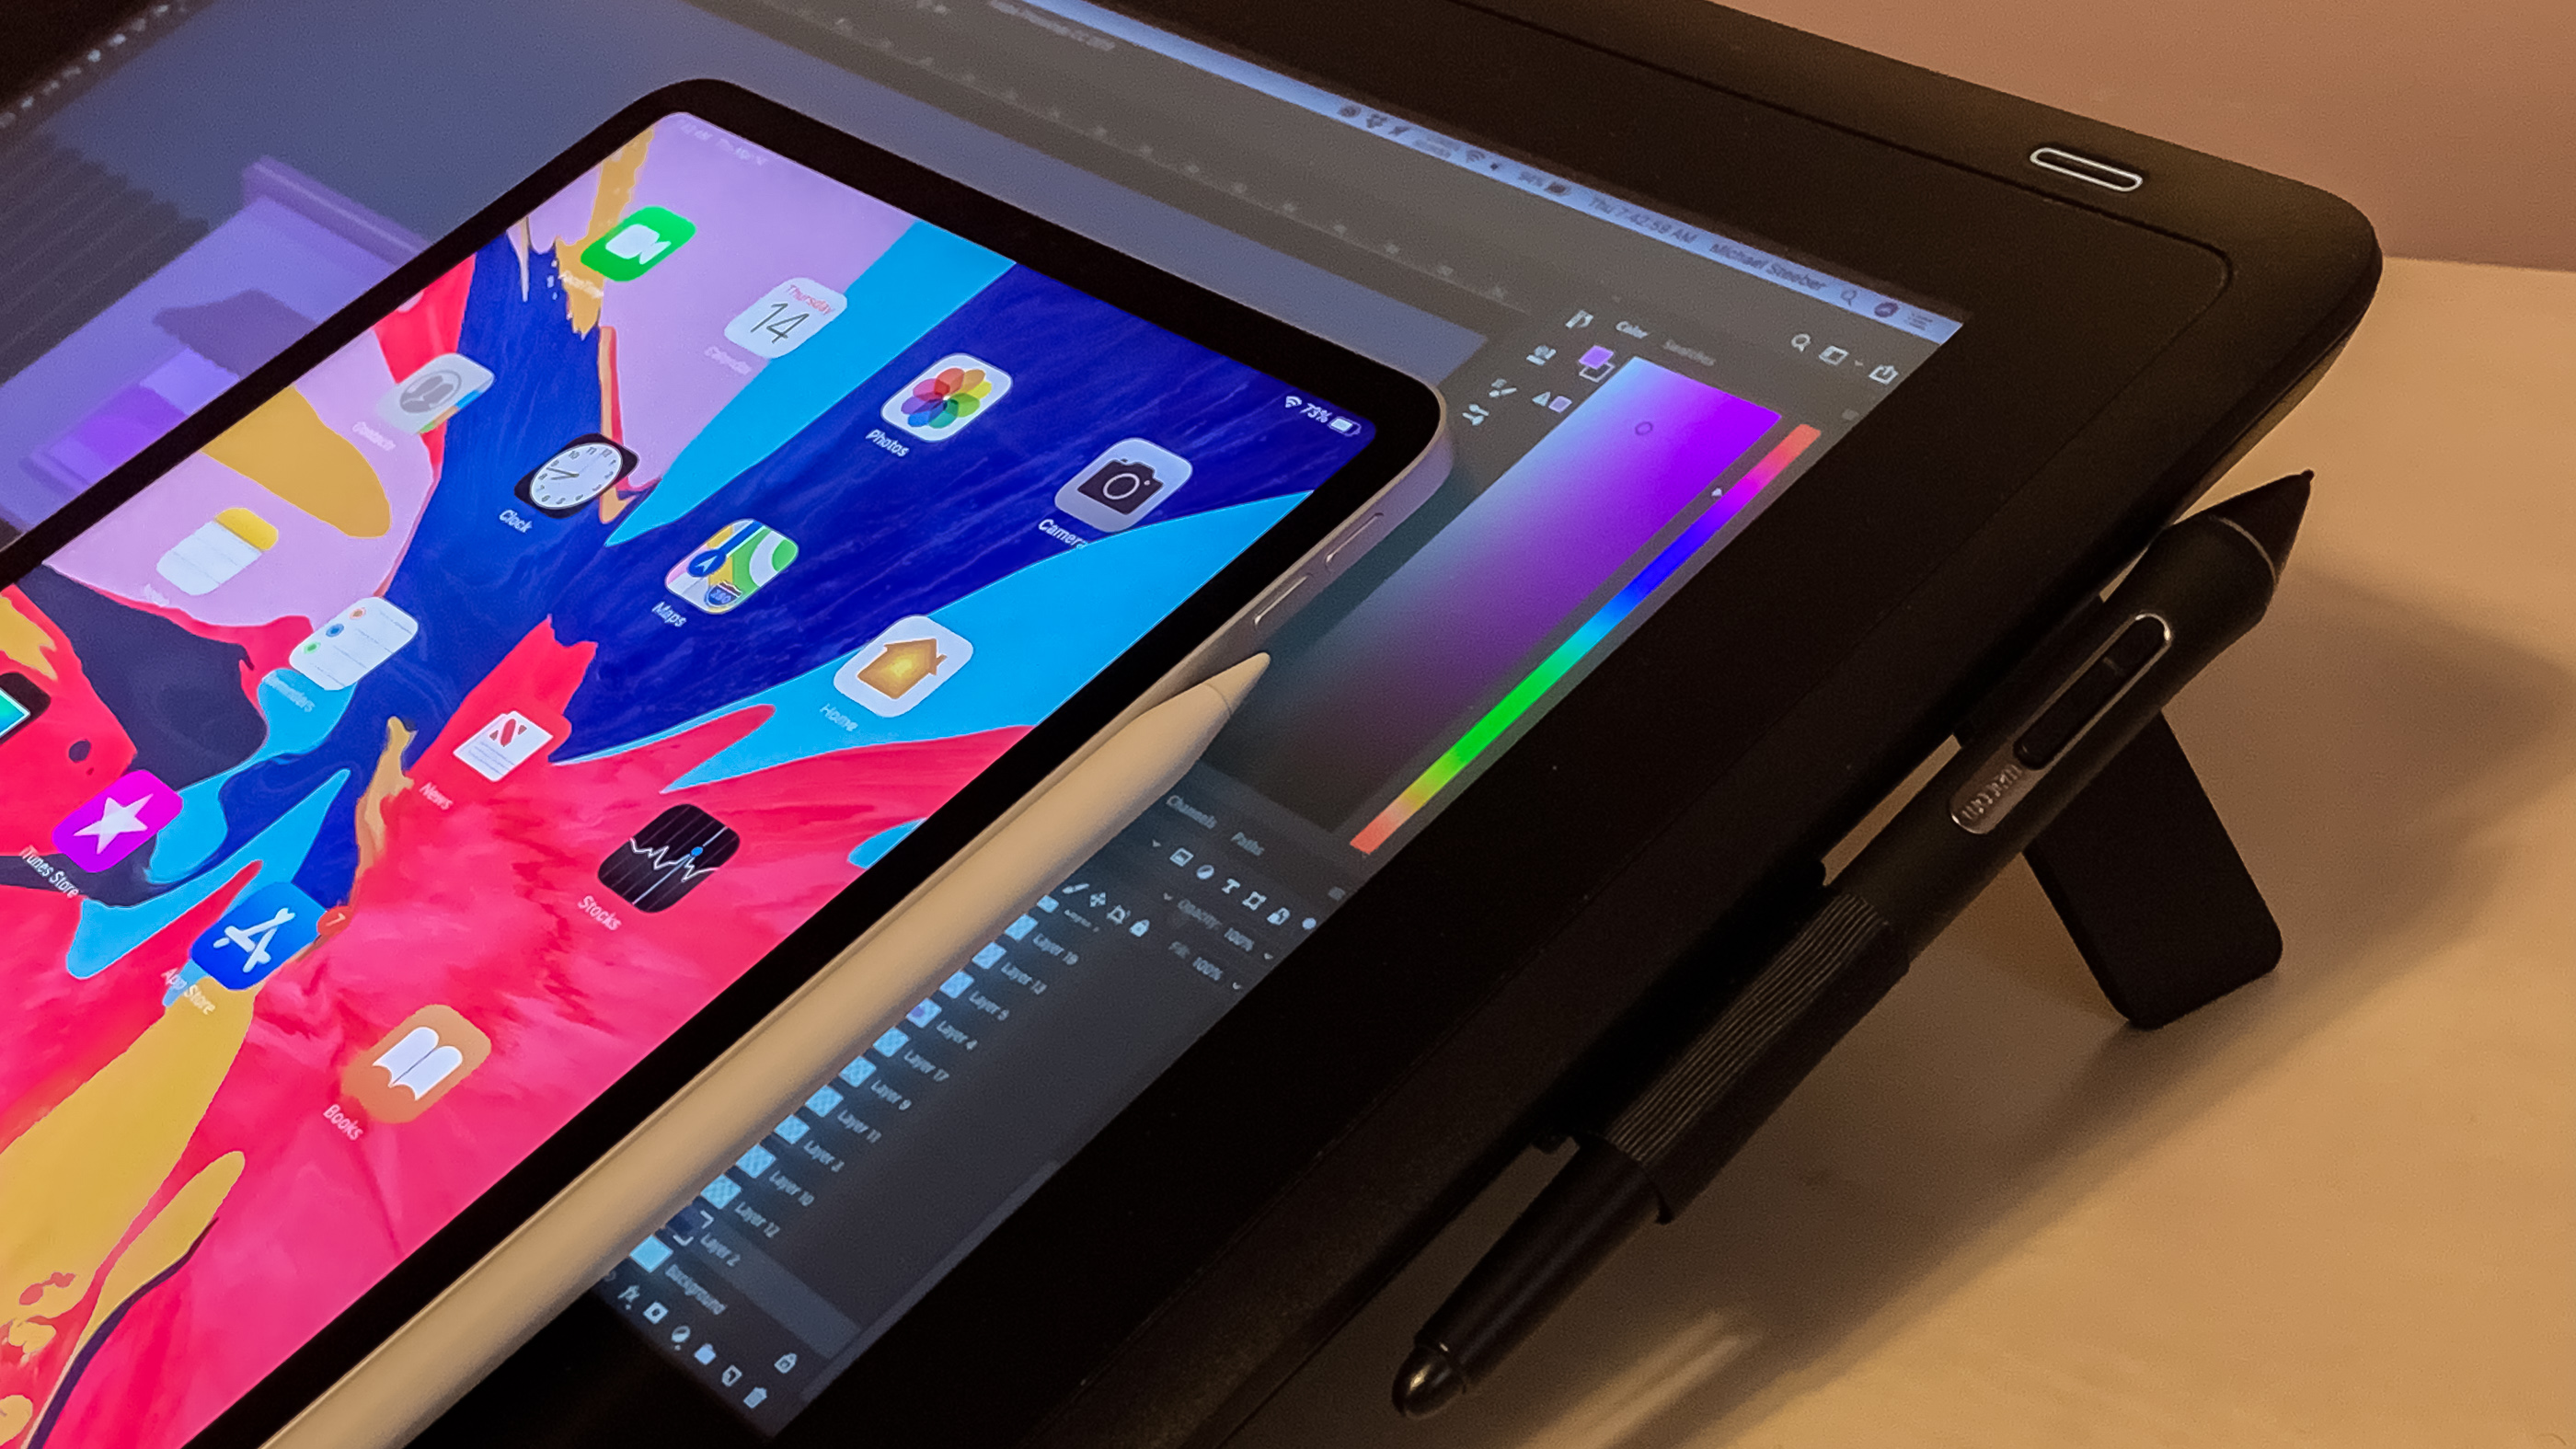 Hands-on: Wacom's Cintiq 16 tablet from the perspective of an iPad Pro user  - 9to5Mac